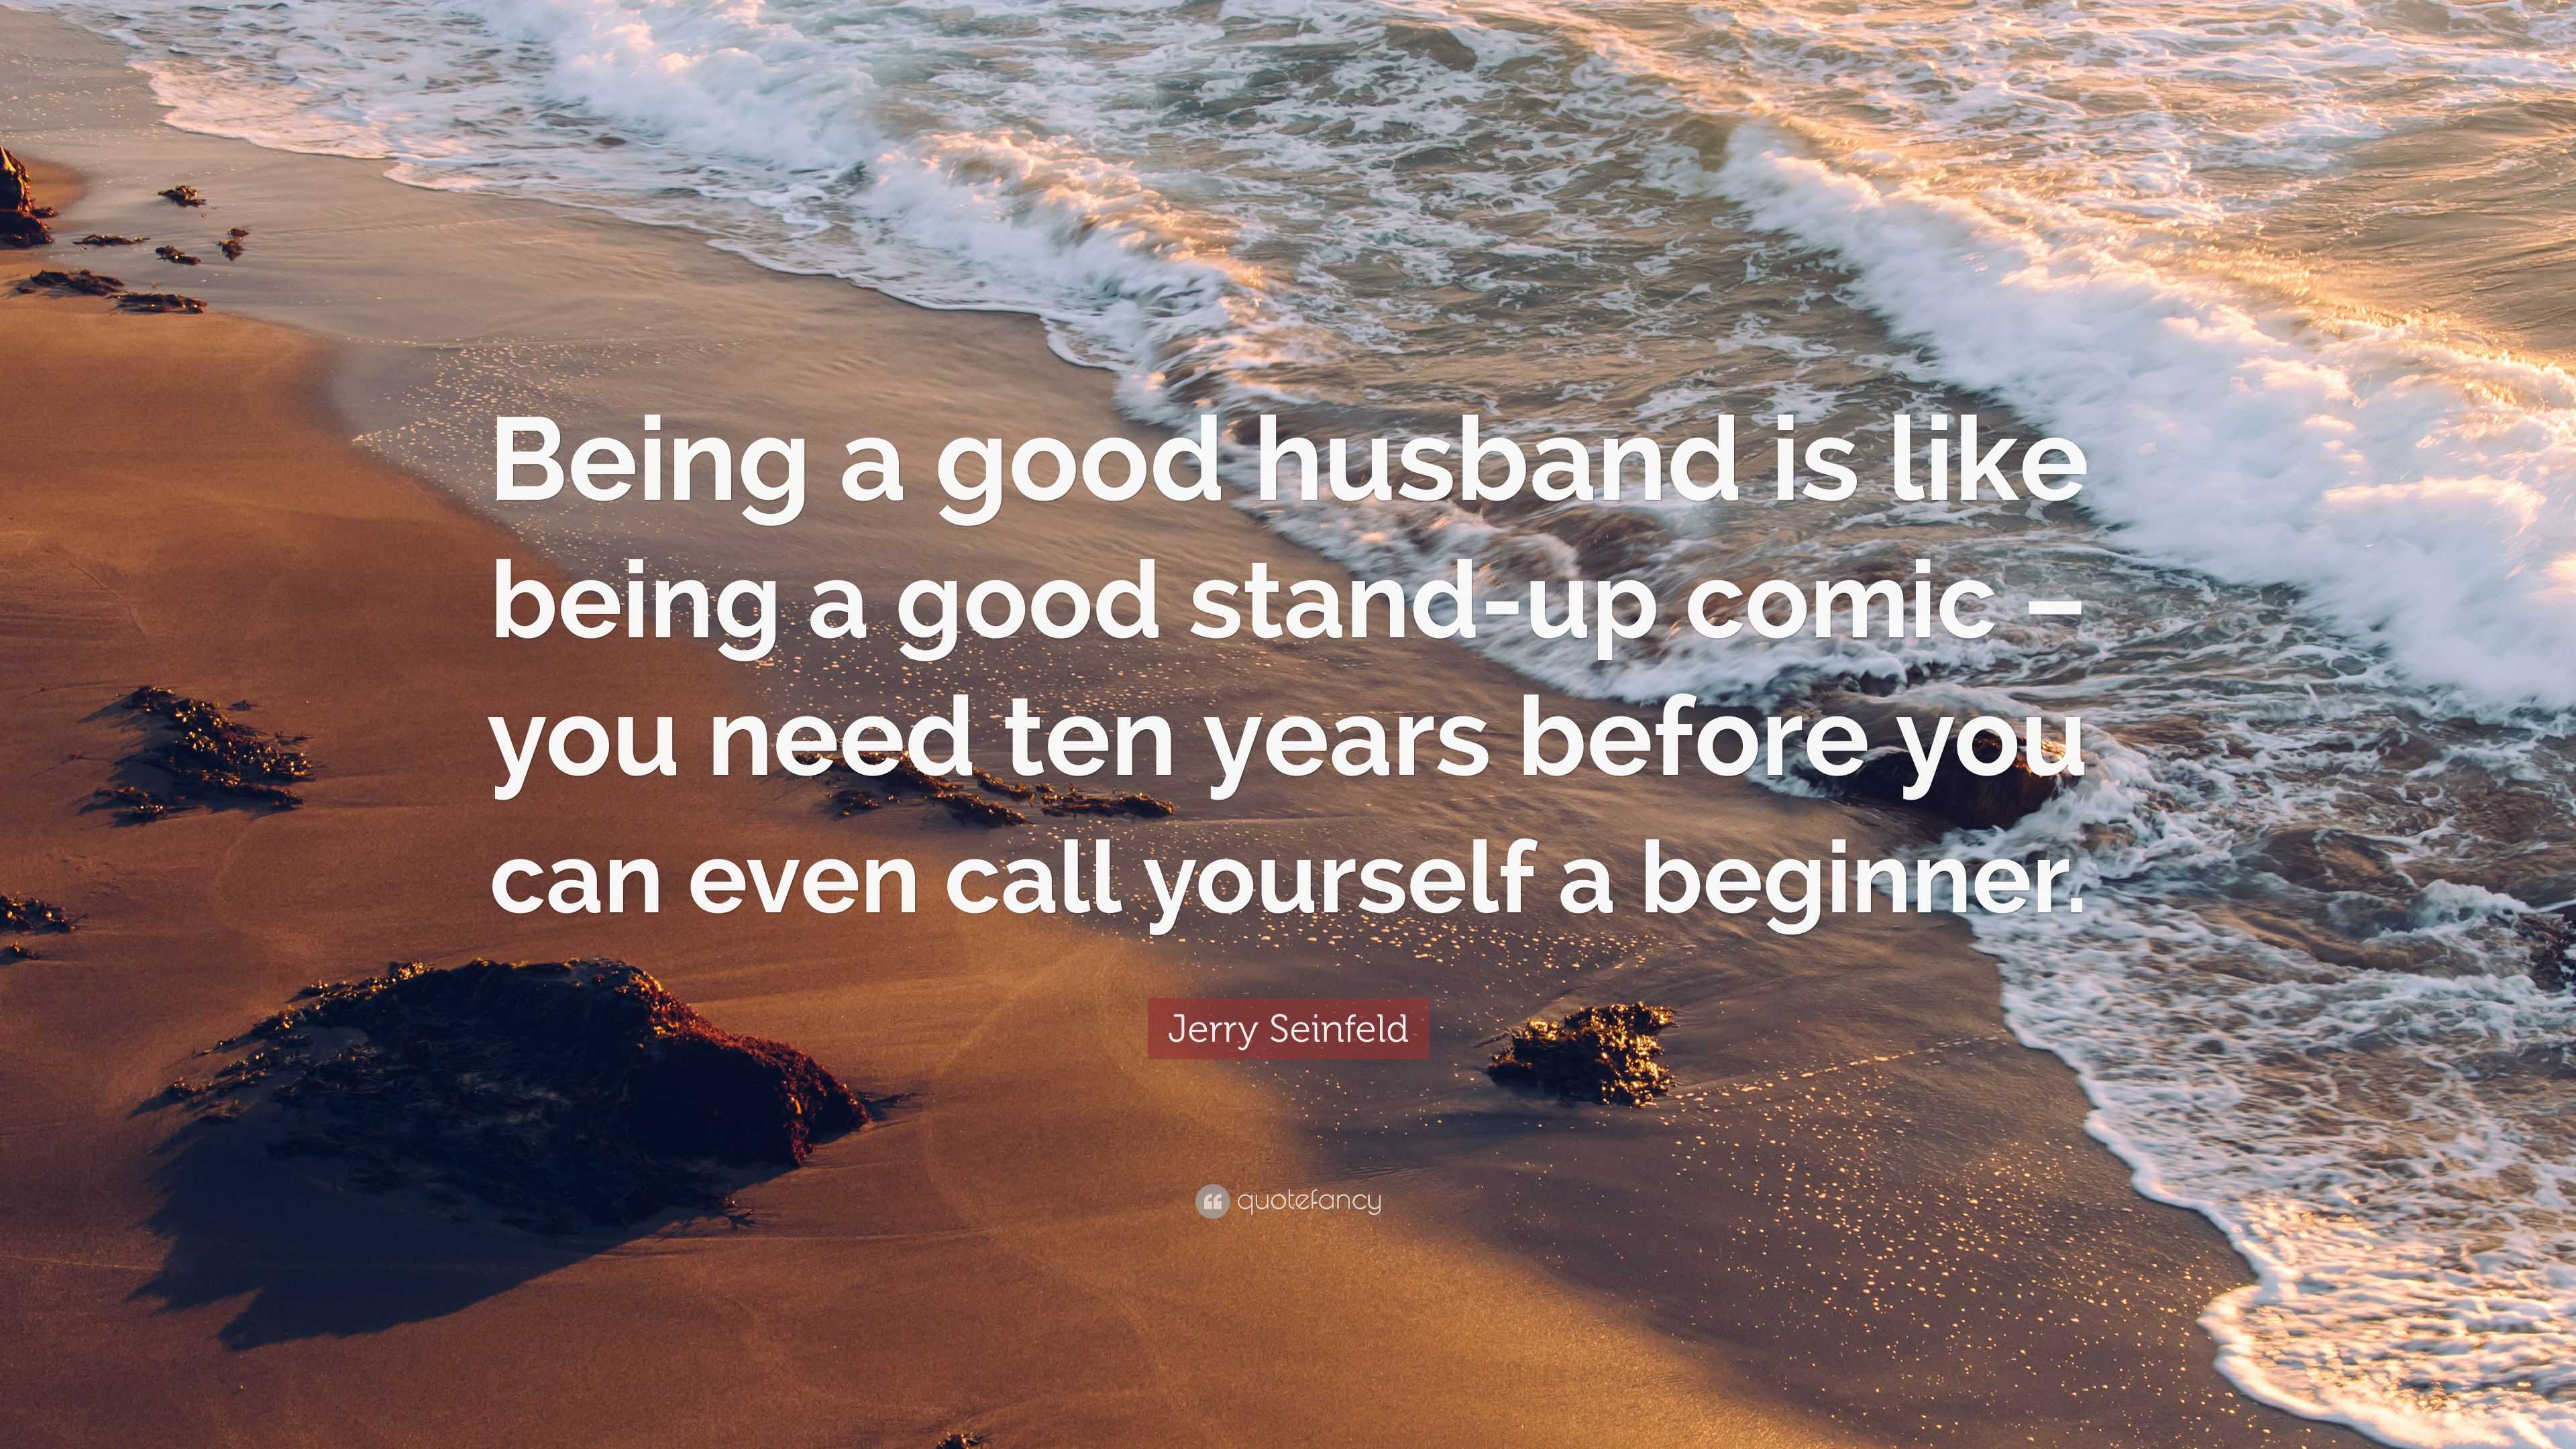 Jerry Seinfeld Quote: "Being a good husband is like being ...